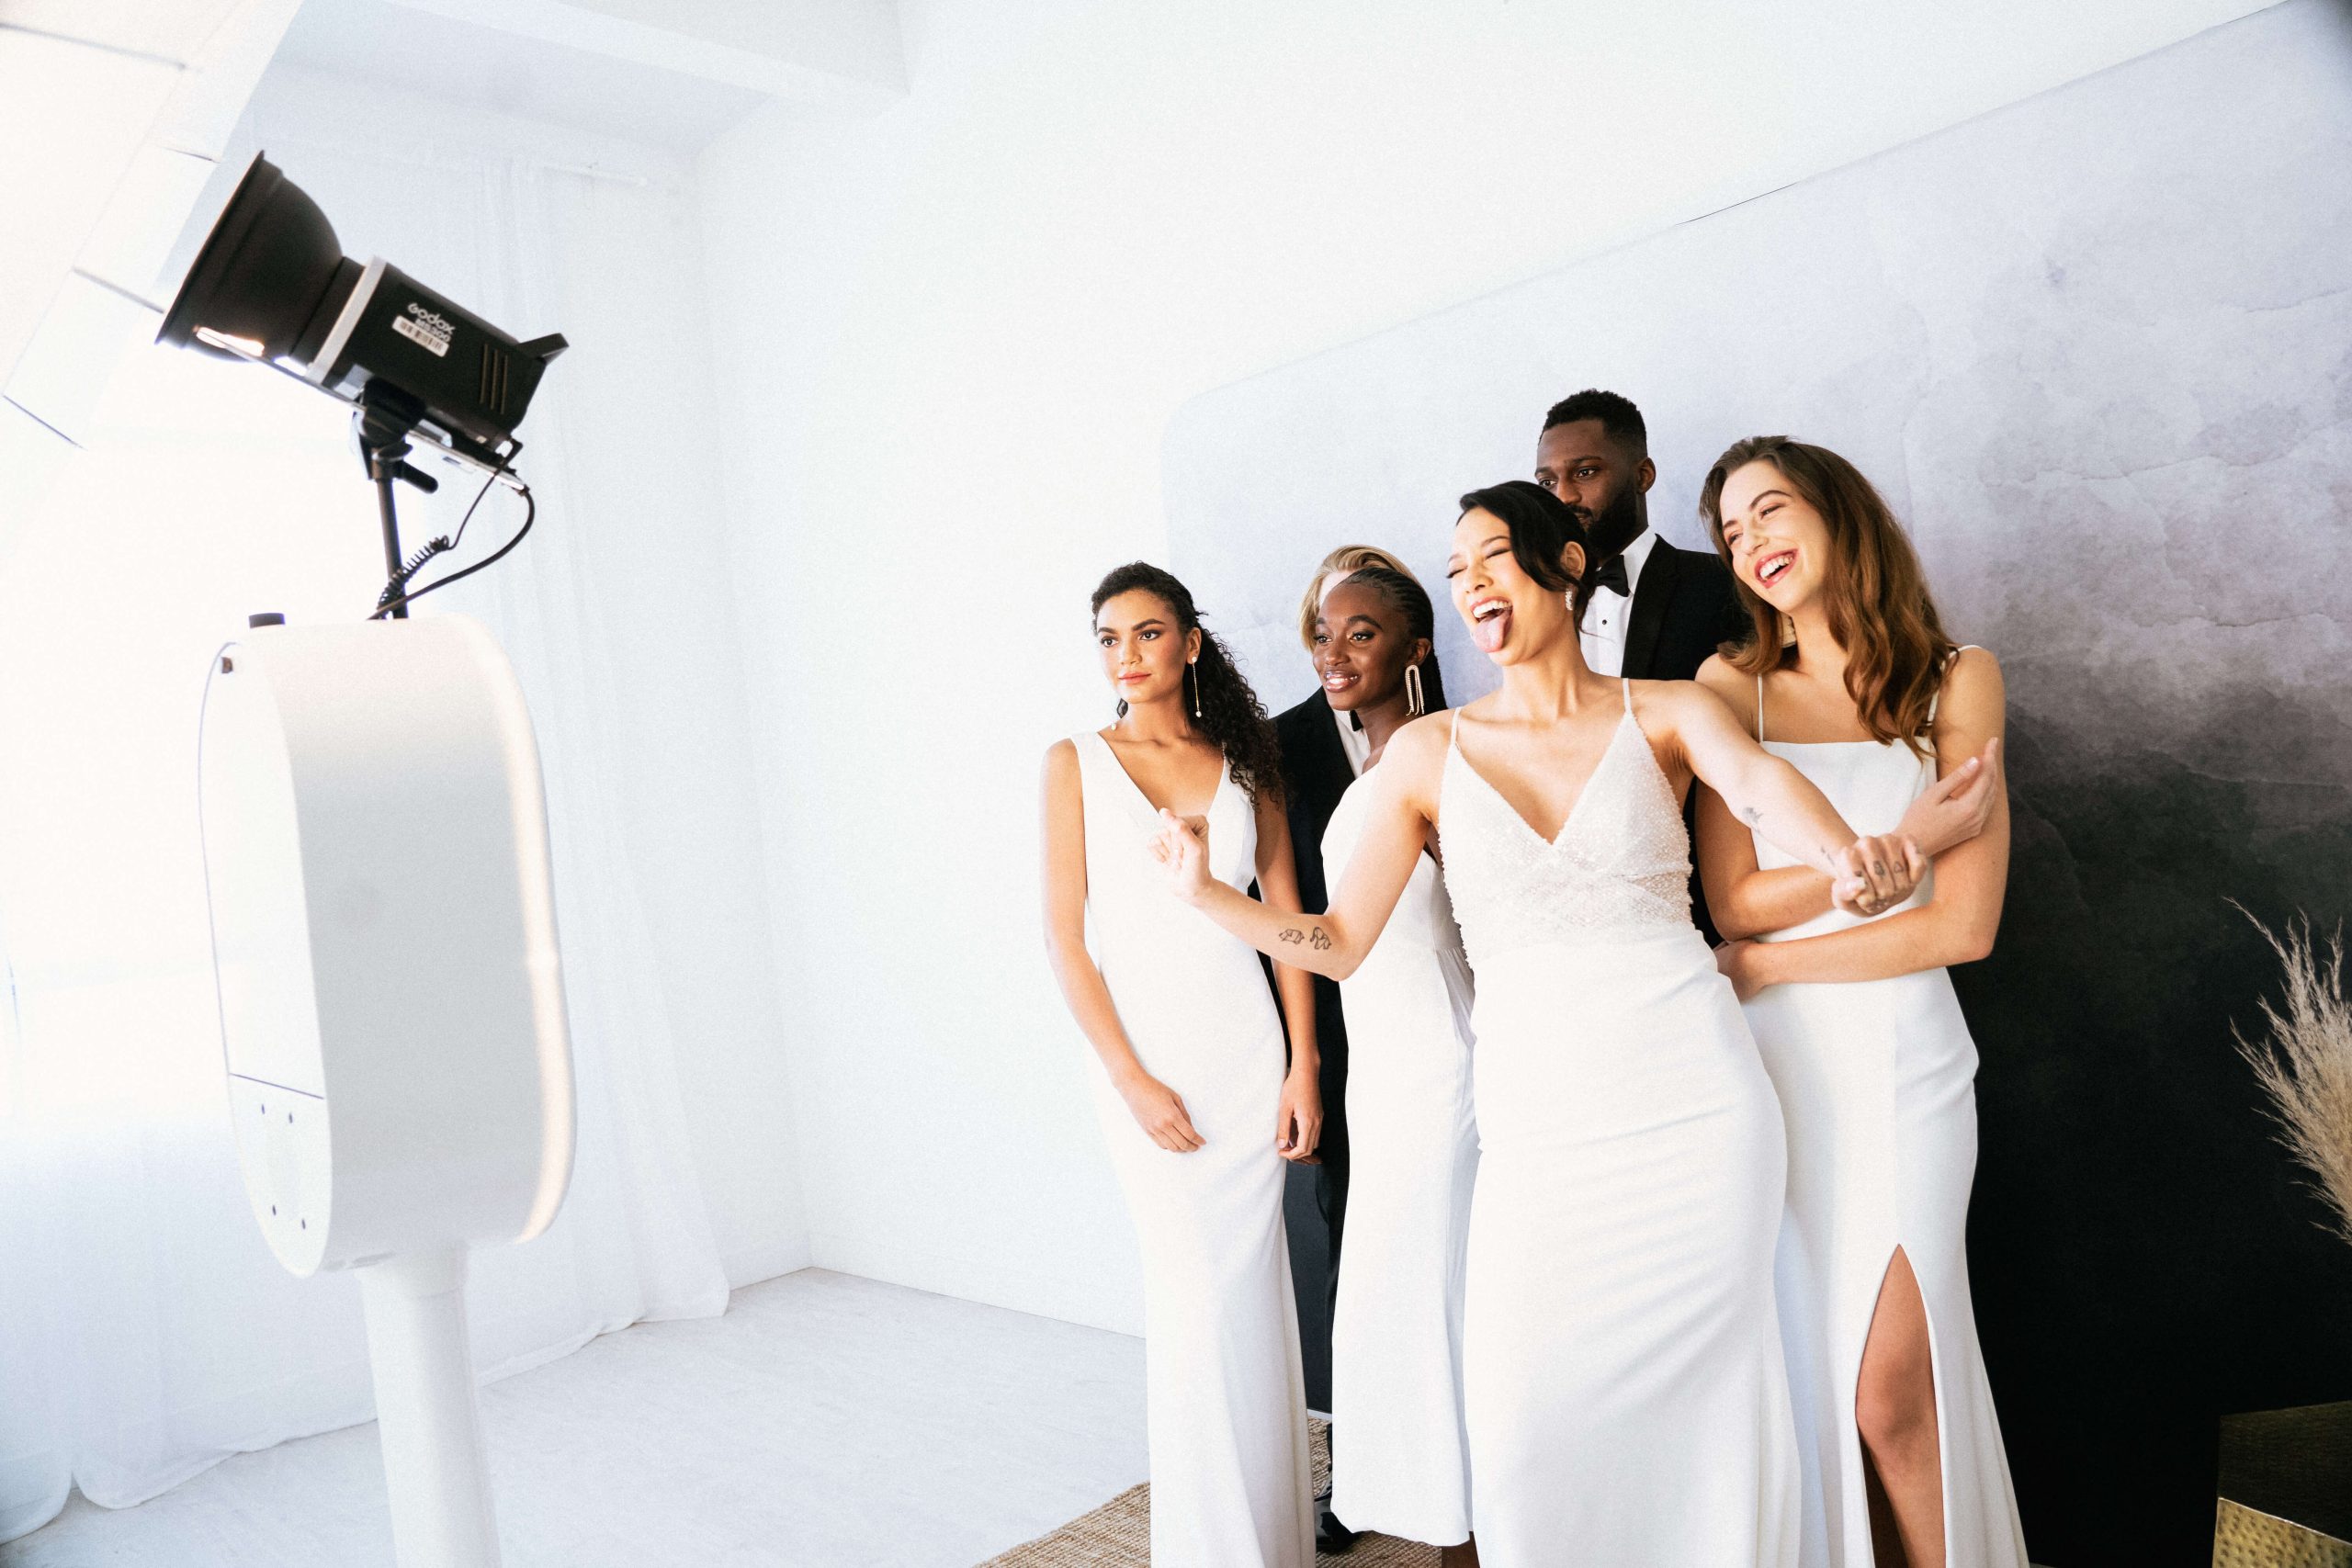 A group of bridesmaids posing at the wedding photo booth.